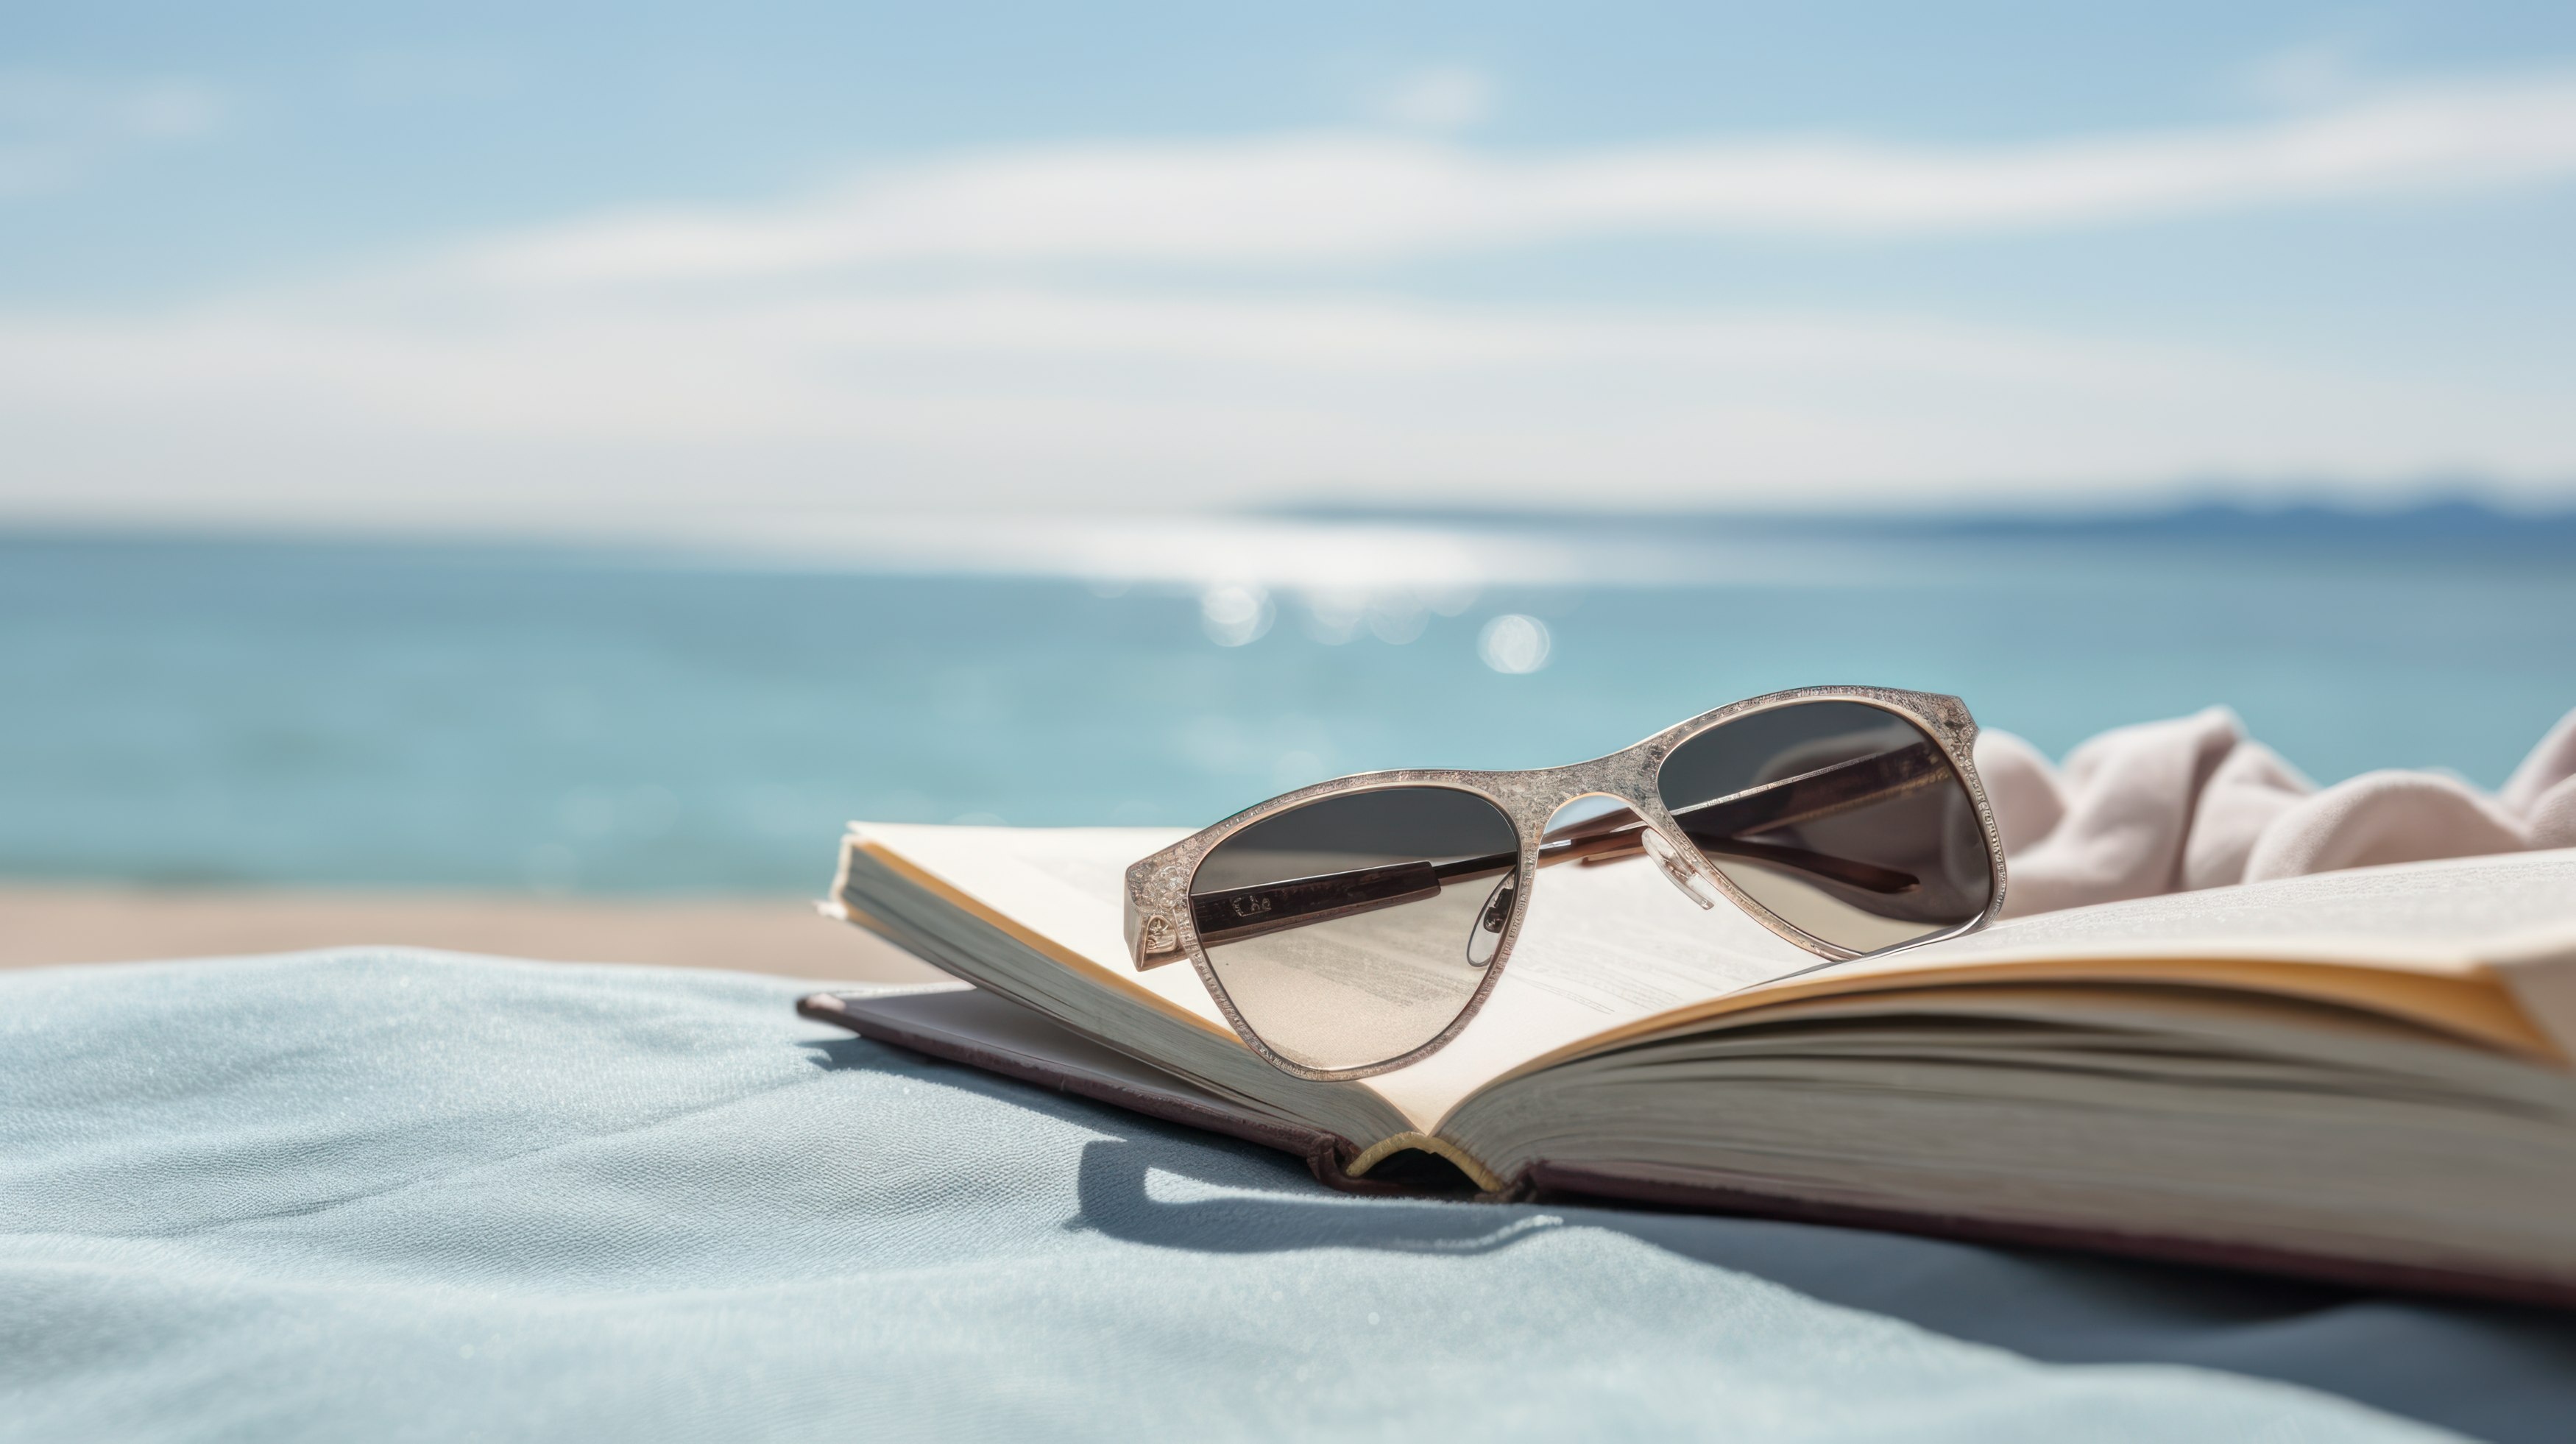 Books on beach with sunglasses